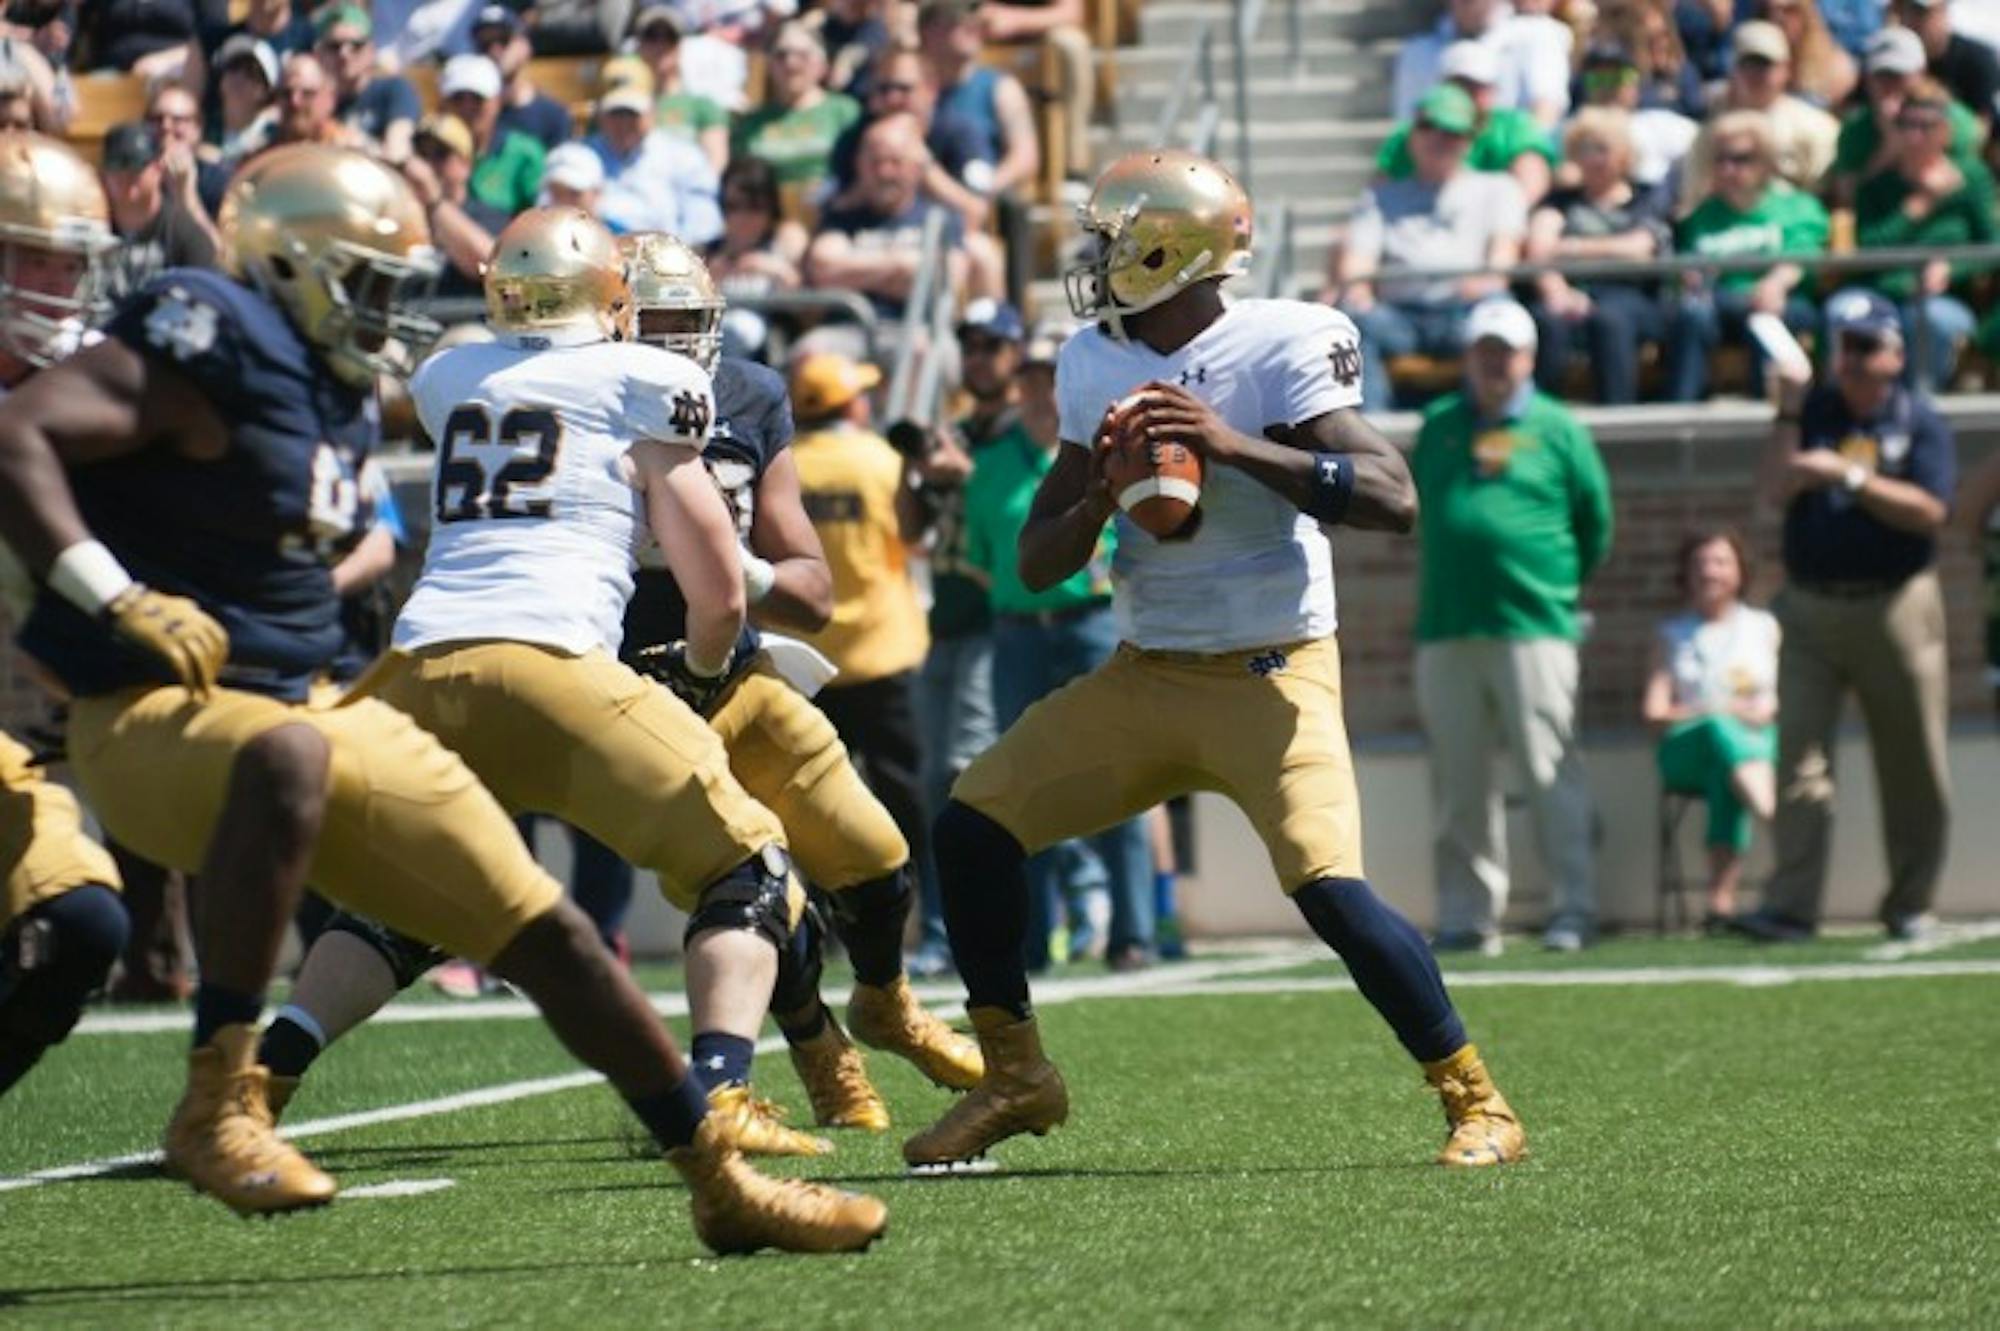 Senior quarterback looks for an open receiver during Notre Dame's Blue-Gold Game at Notre Dame Stadium.